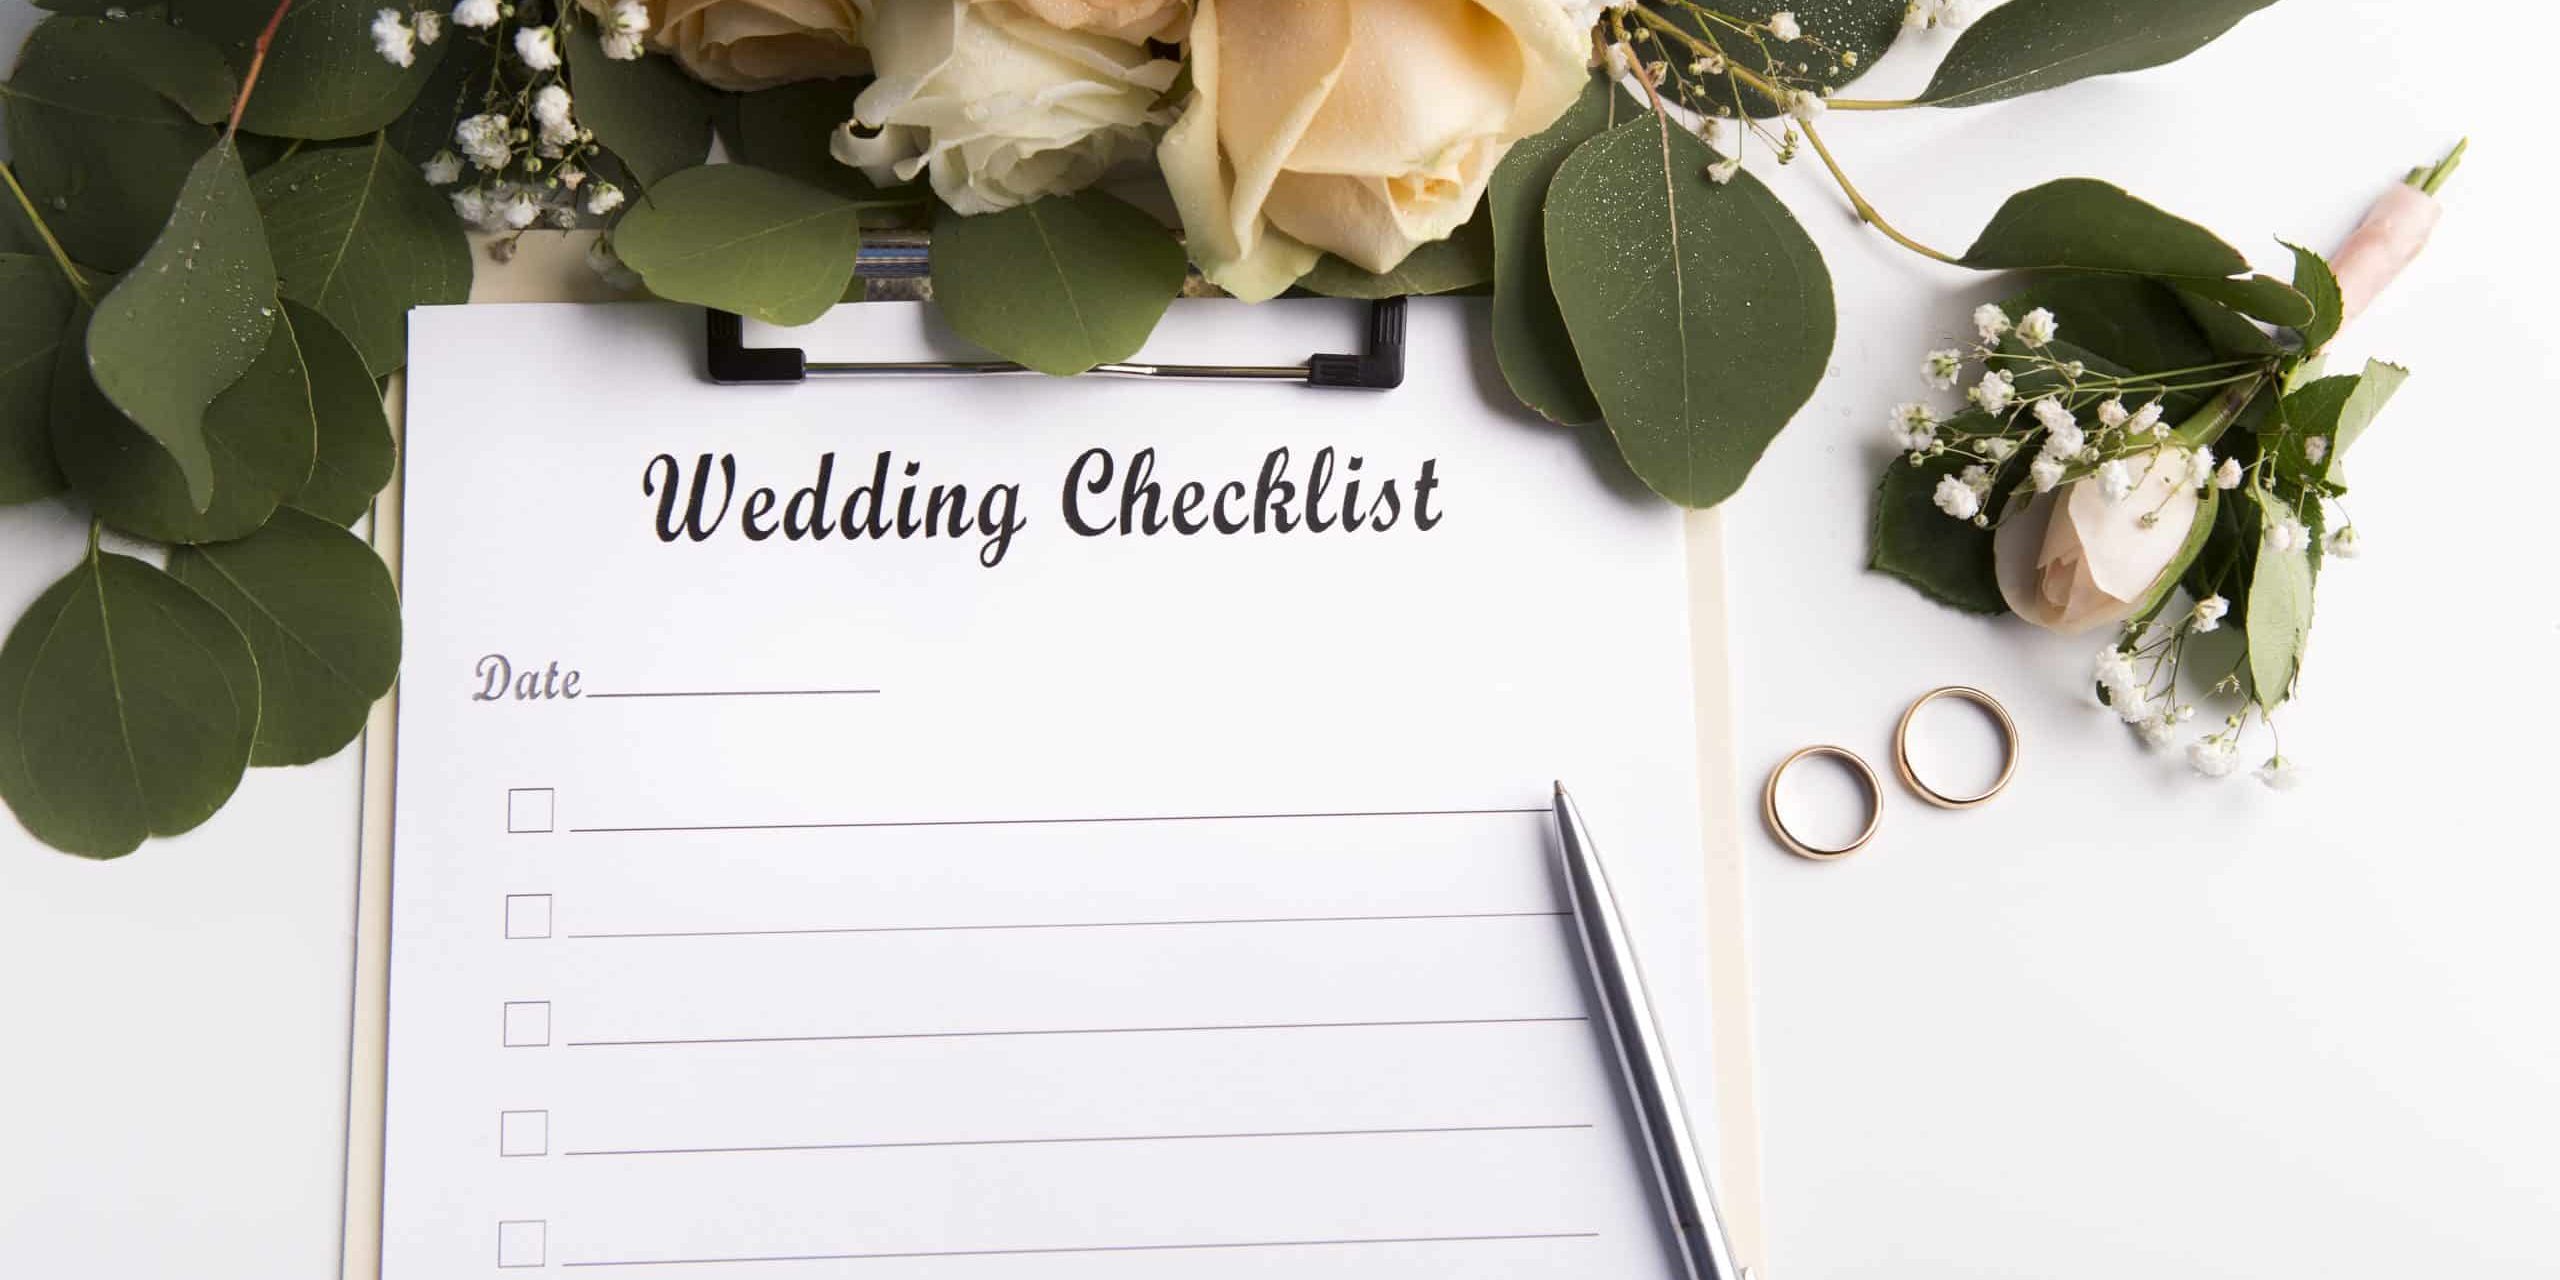 Wedding checklist with copy space for text and roses on background